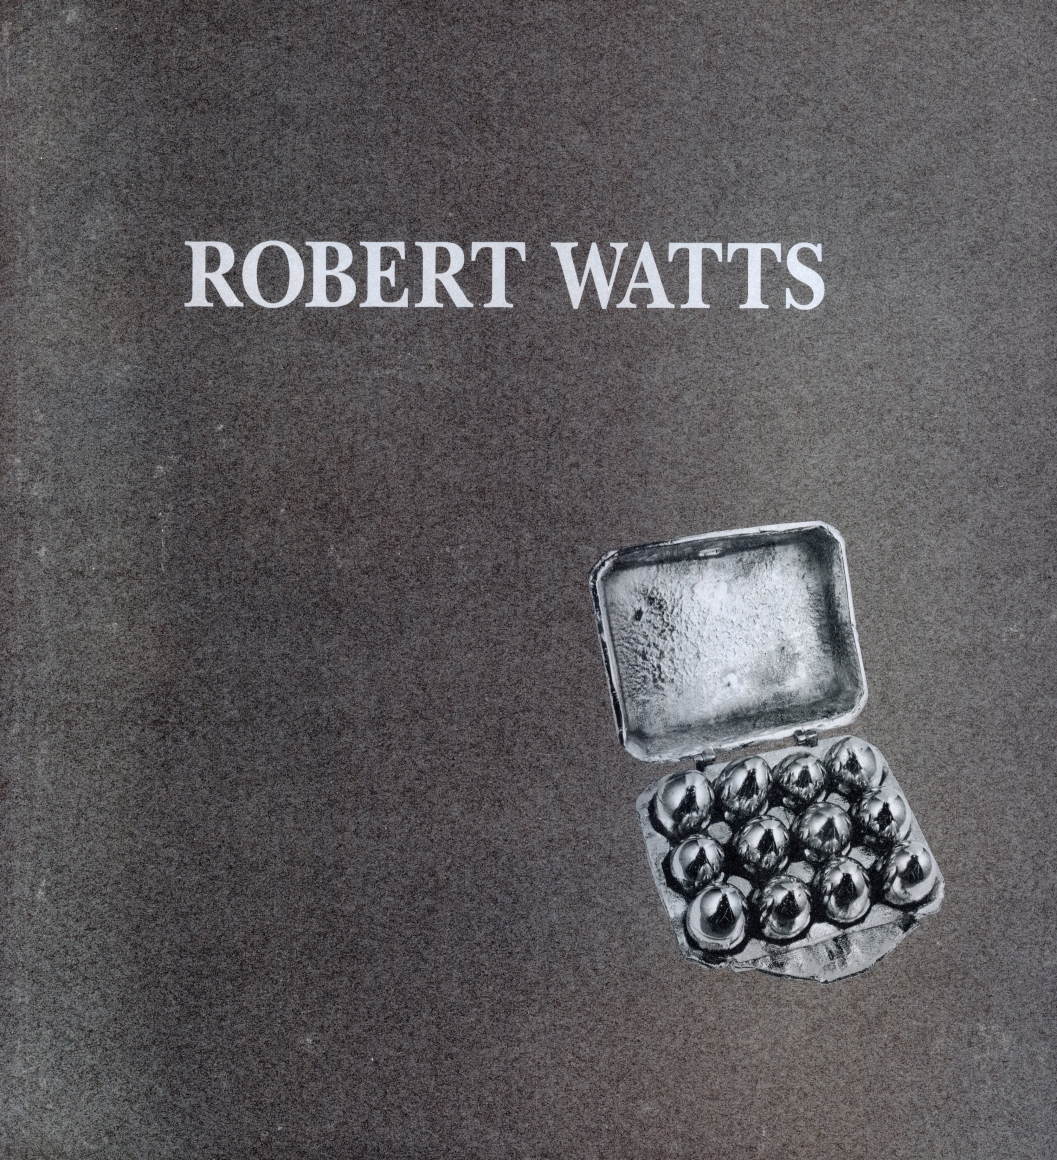 Cover of Robert Watts catalogue published by Leo Castelli in 1990